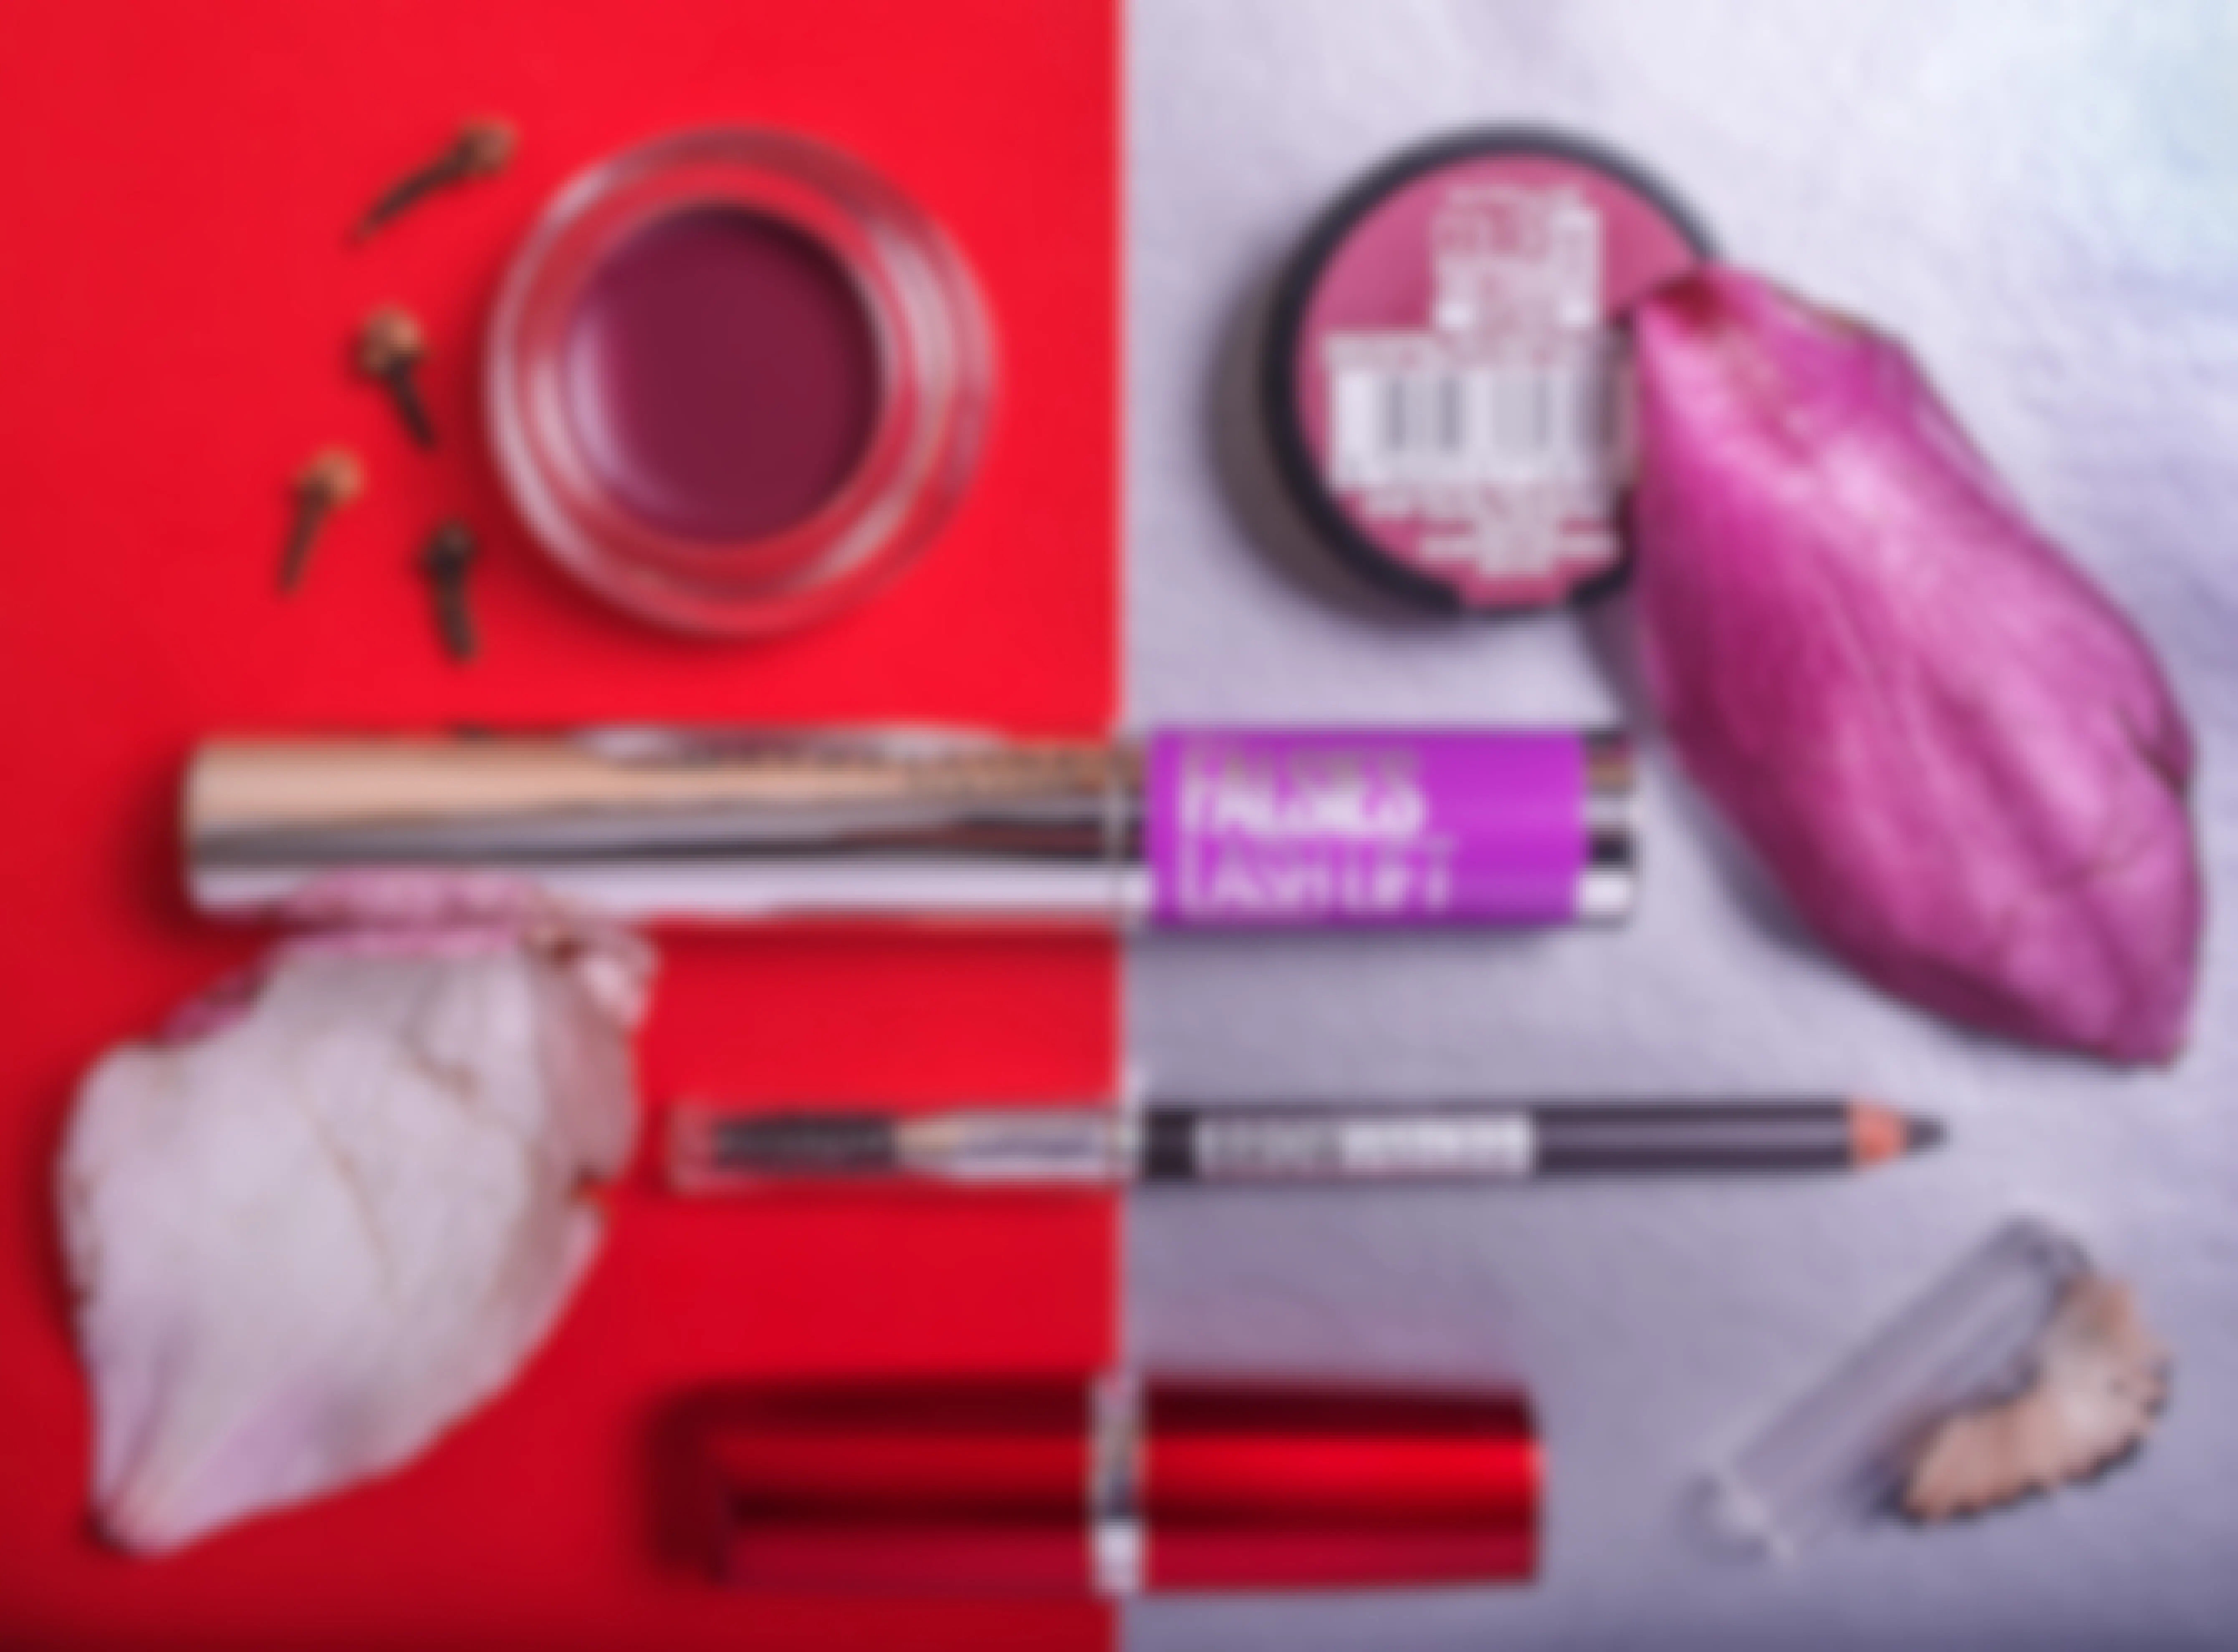 Maybelline makeup laid out on a red and silver background with flower petals.